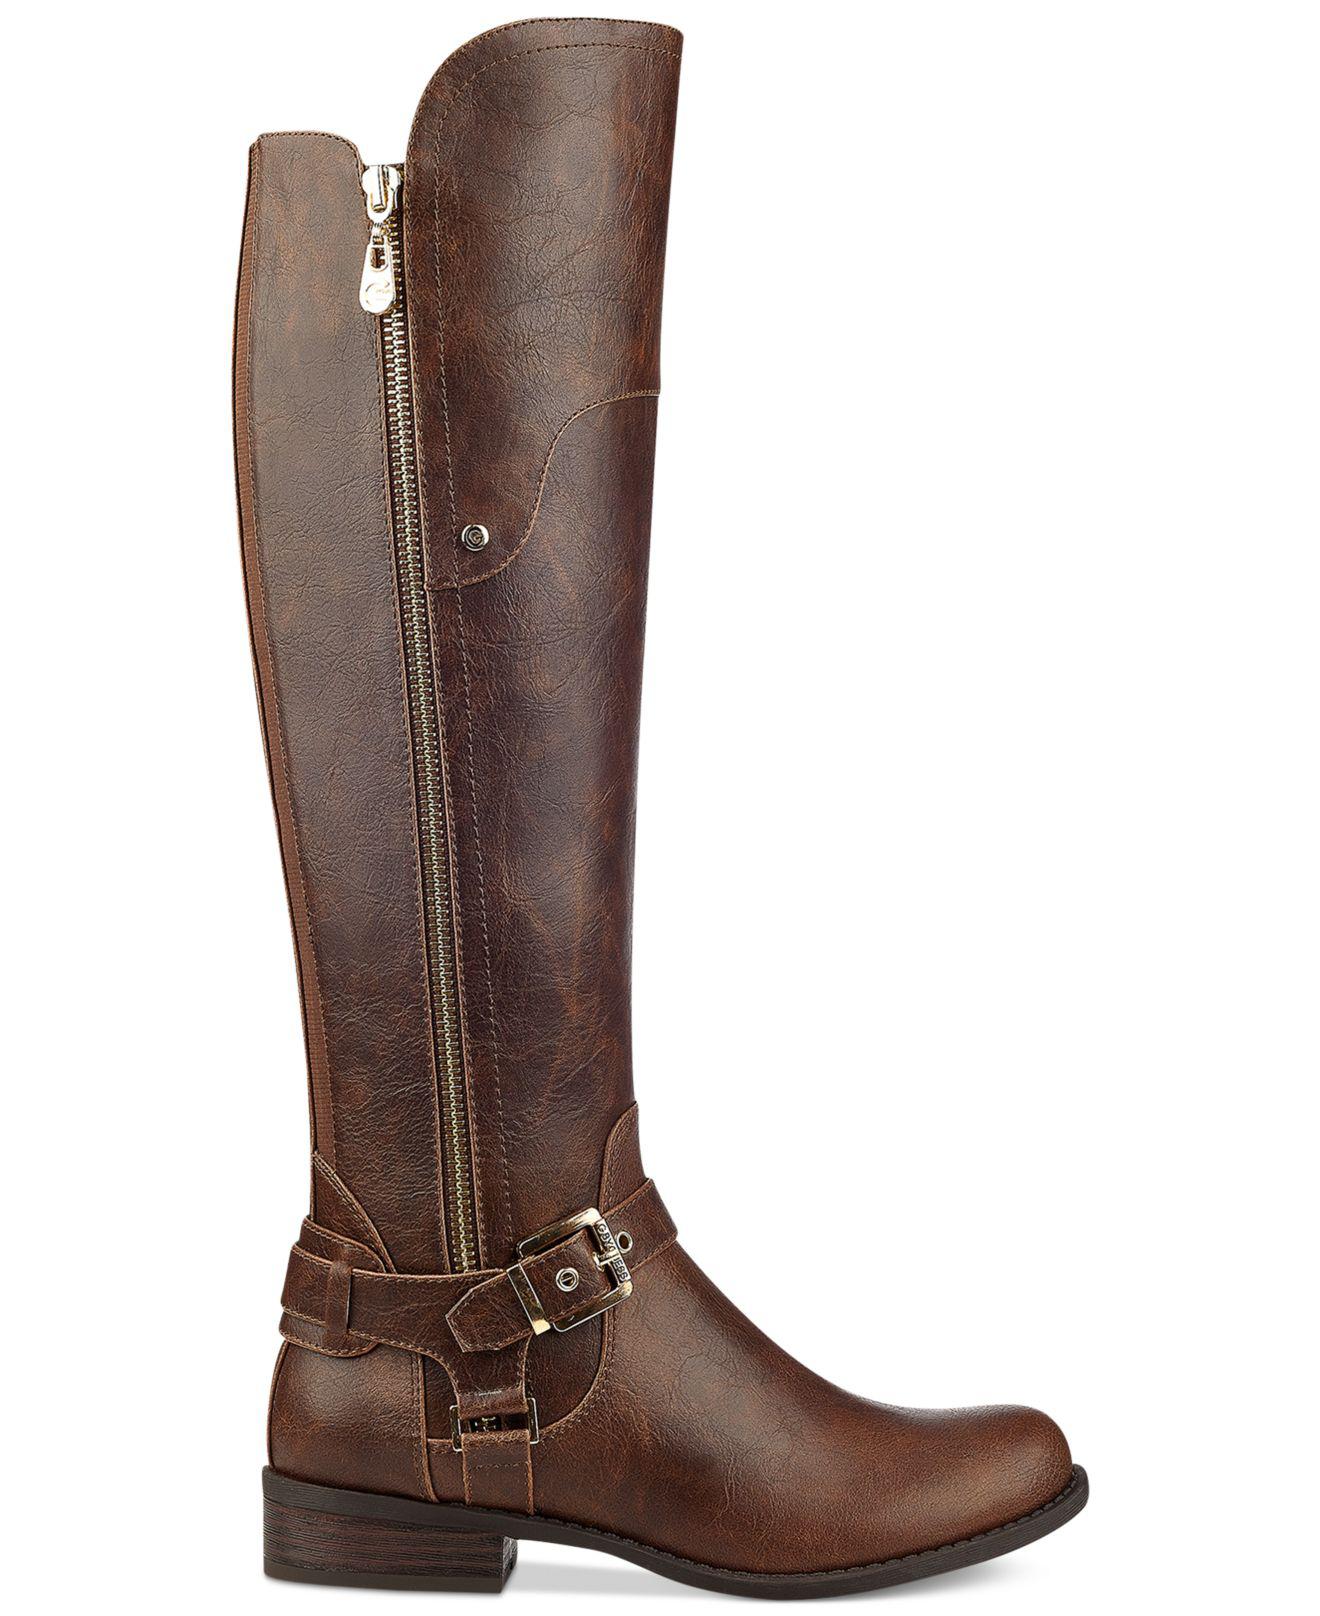 G by Guess Harson Tall Boots in Brown 